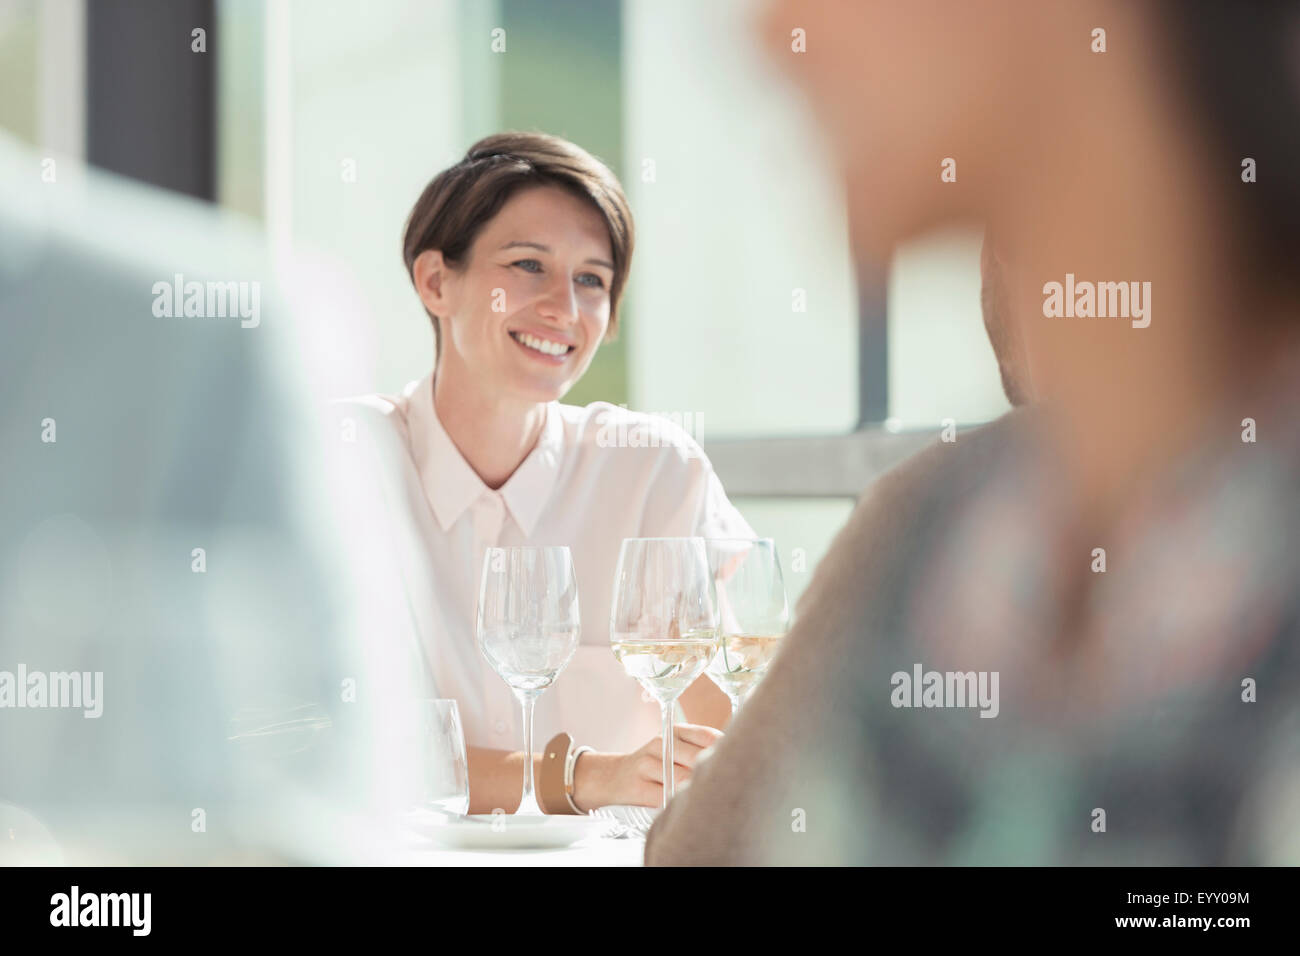 Smiling woman drinking white wine in restaurant ensoleillé Banque D'Images